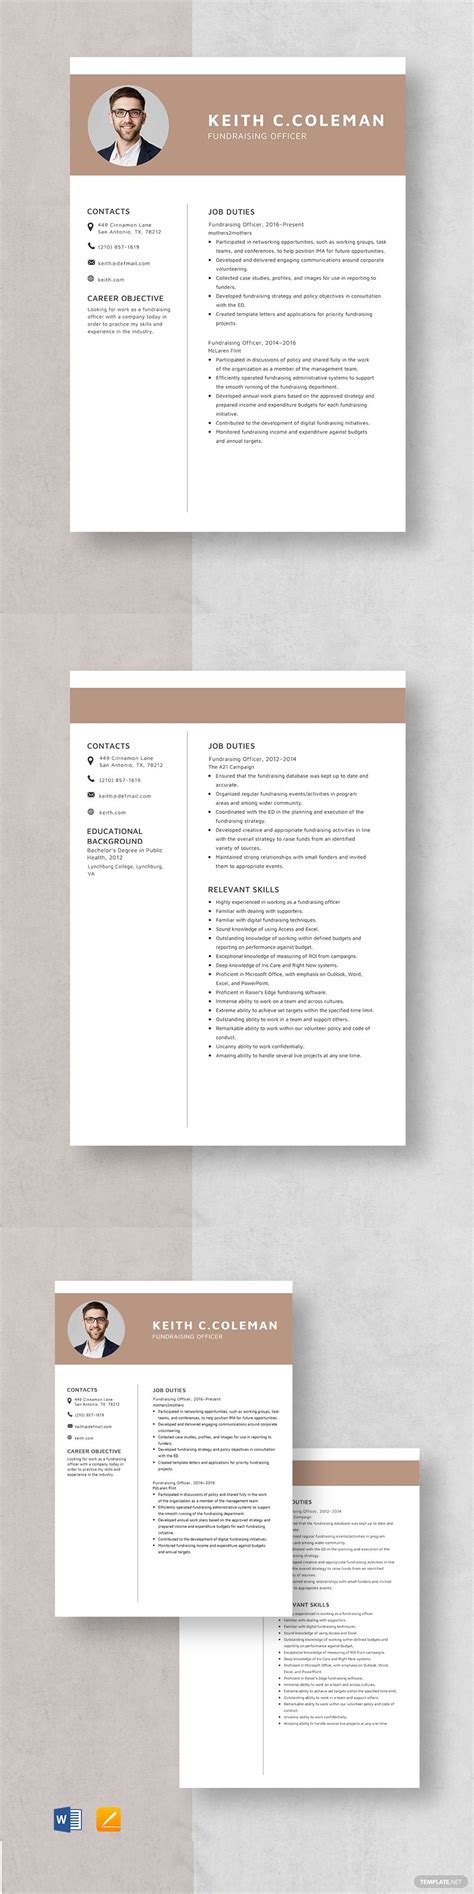 fundraising officer resume template   resume template